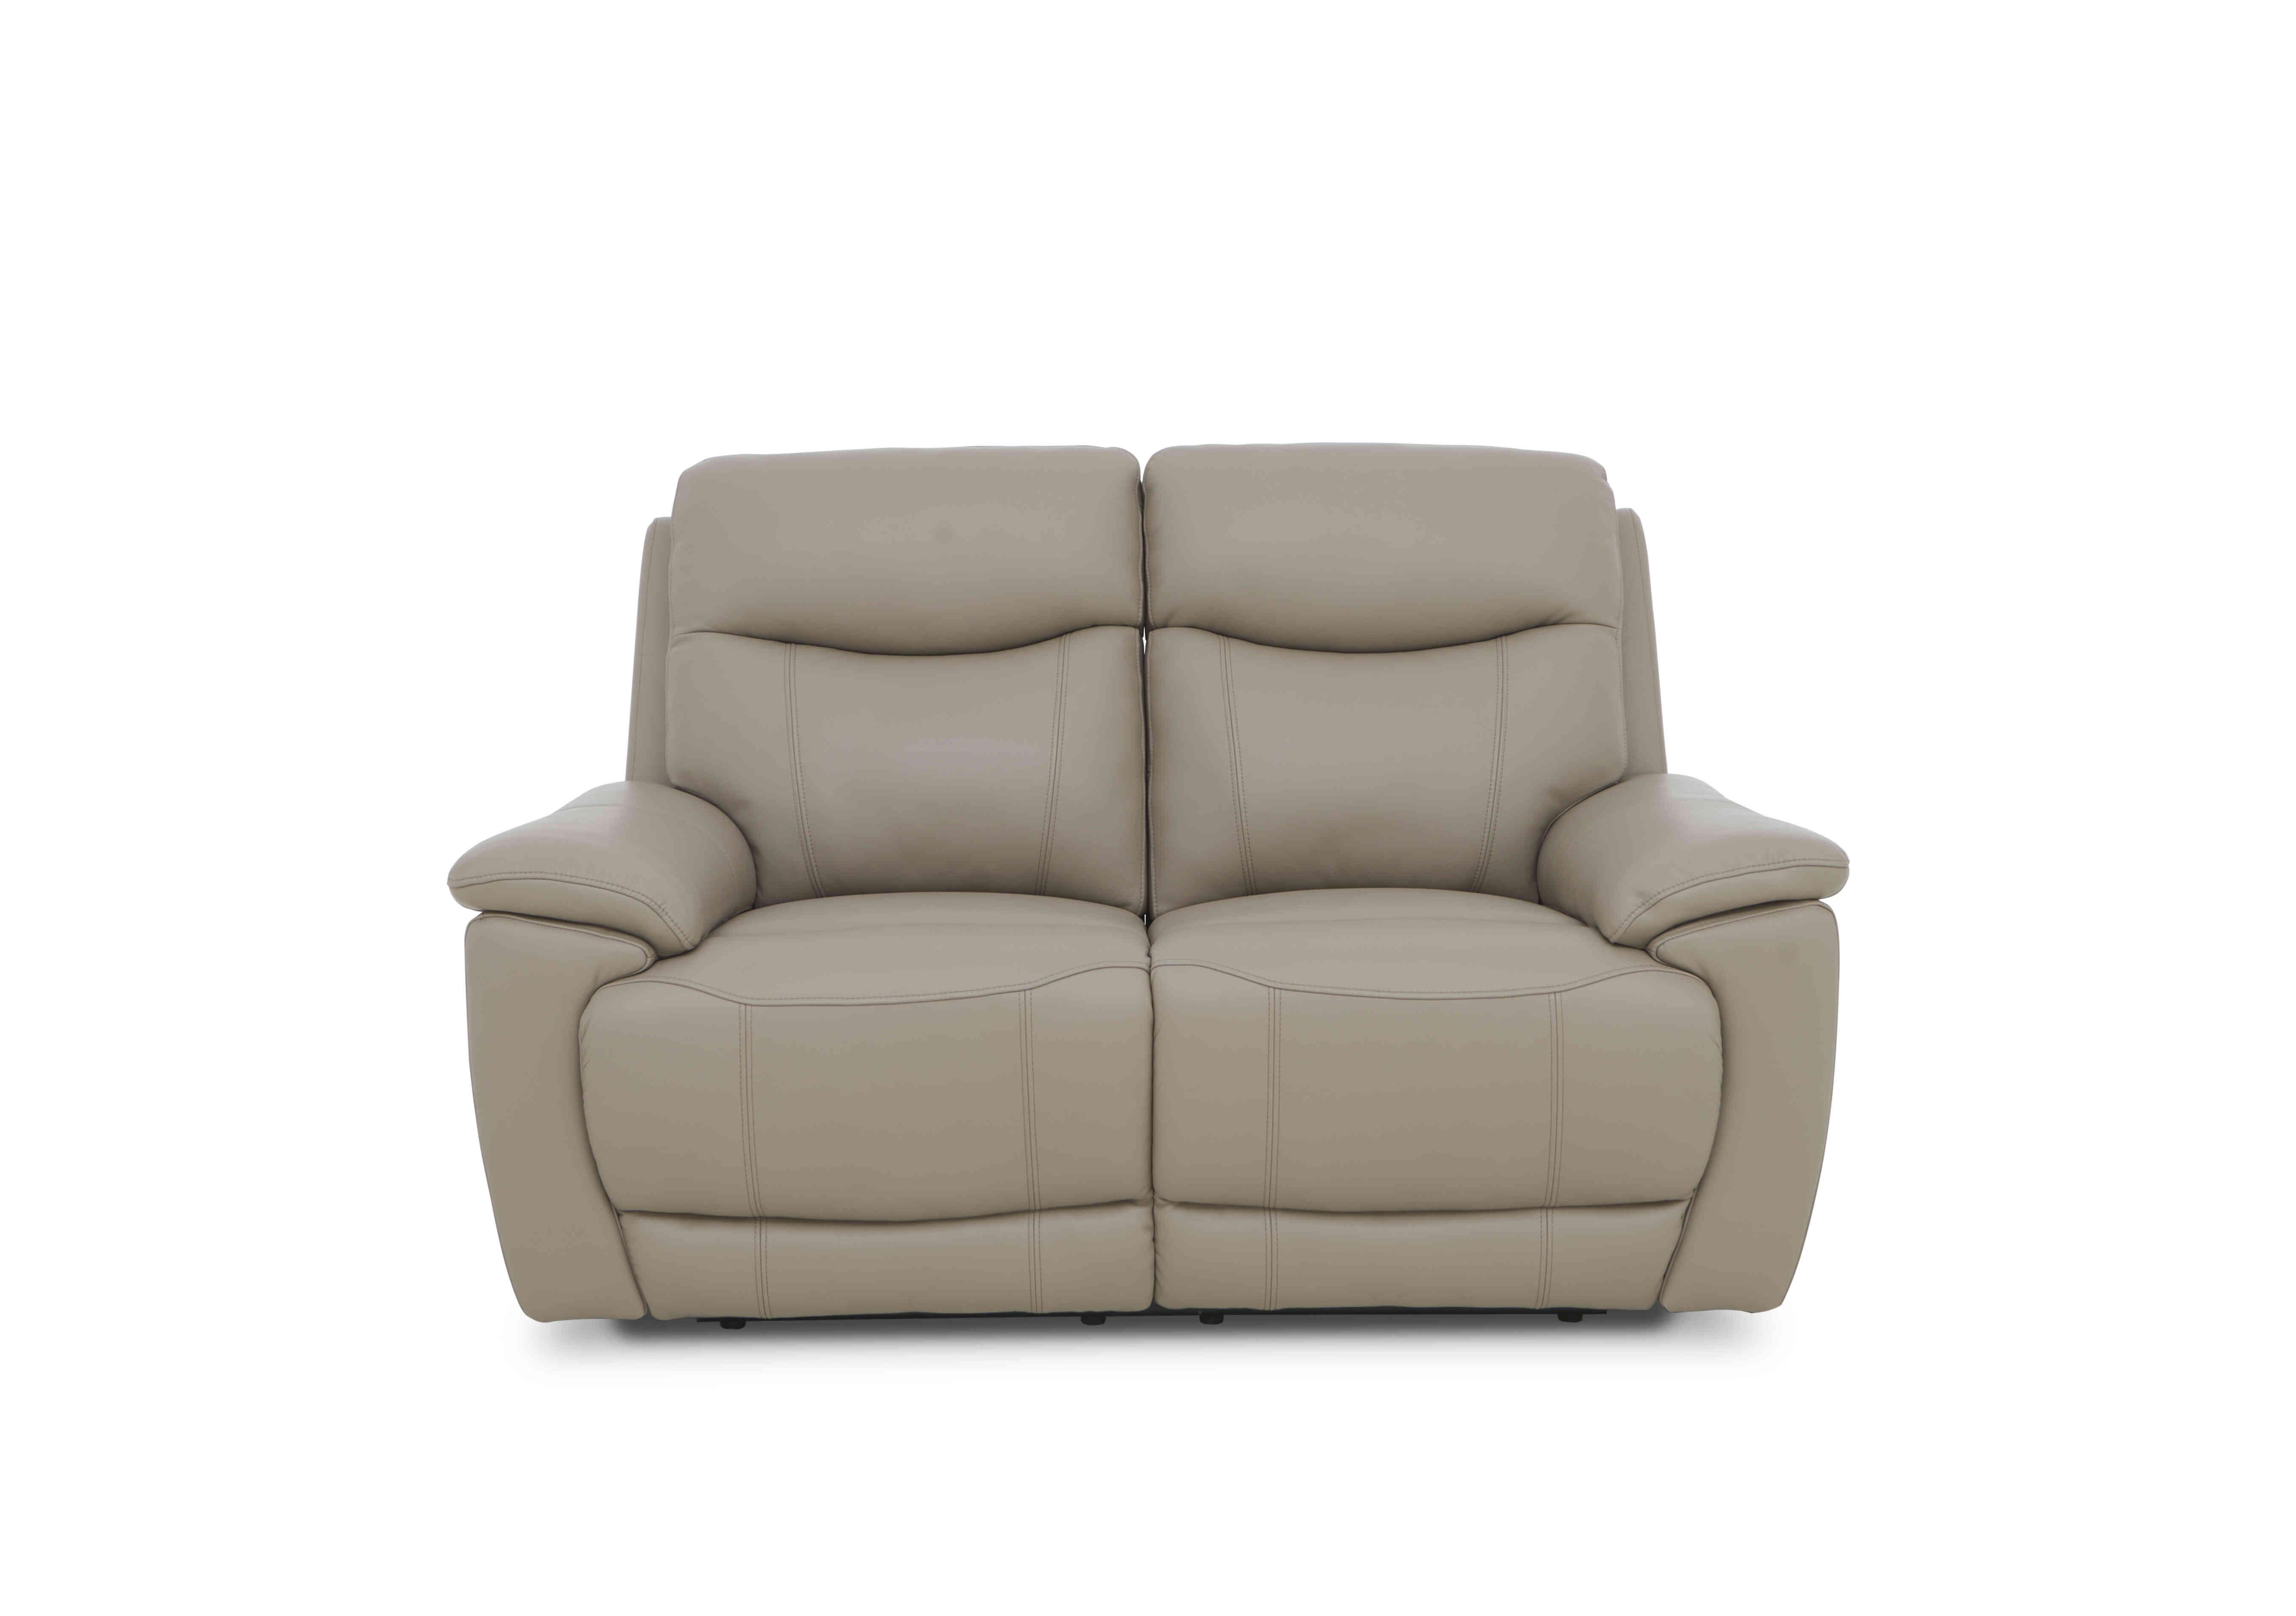 Sloane 2 Seater Leather Sofa in Cat-40/08 Oyster on Furniture Village